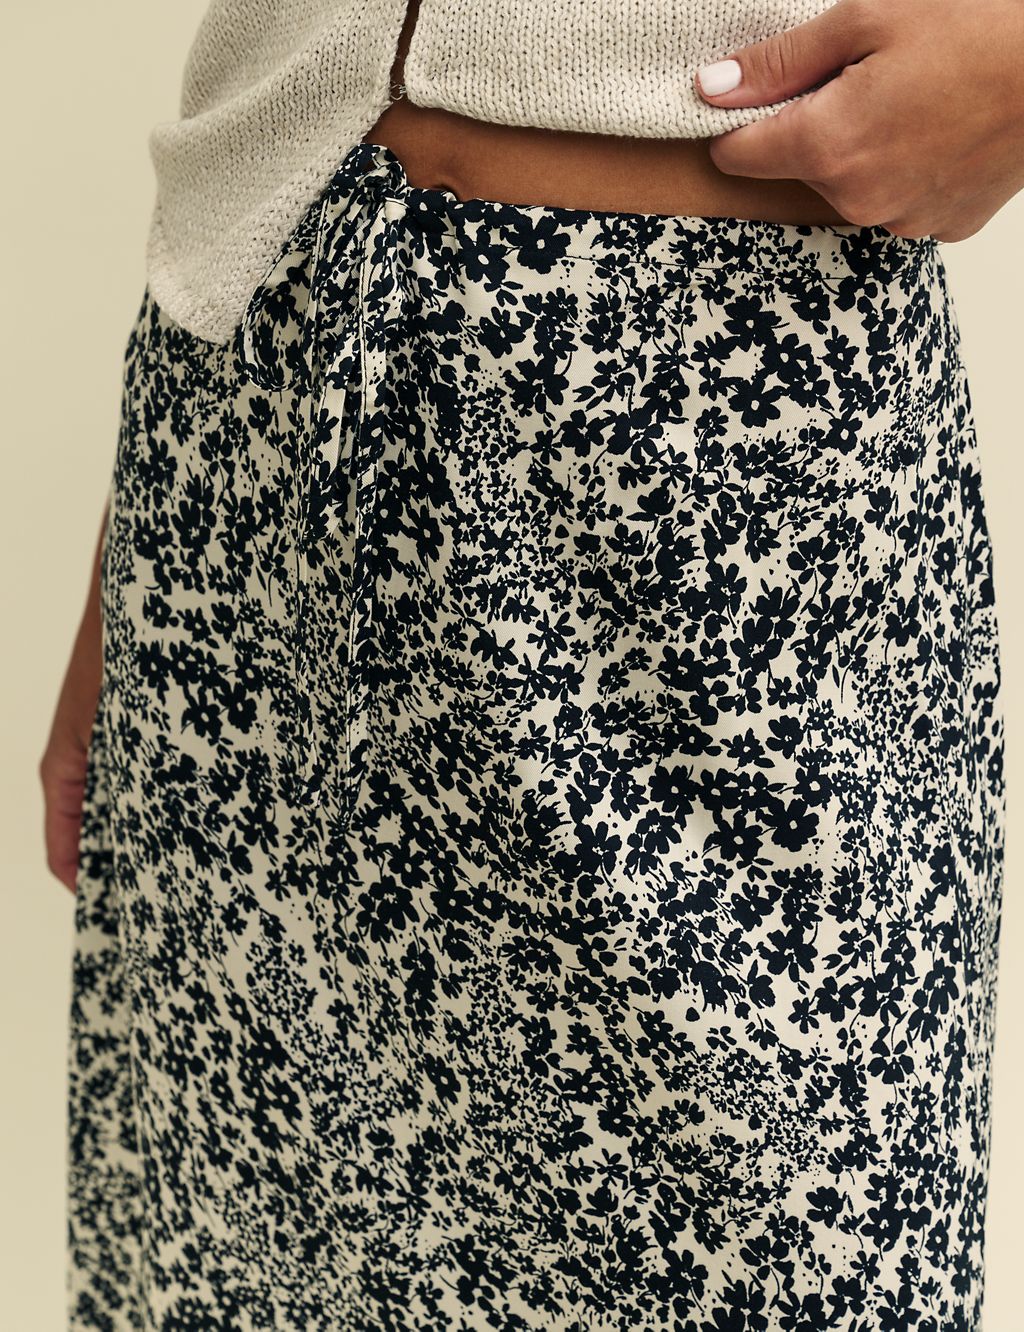 Floral Midaxi A-Line Skirt 6 of 8